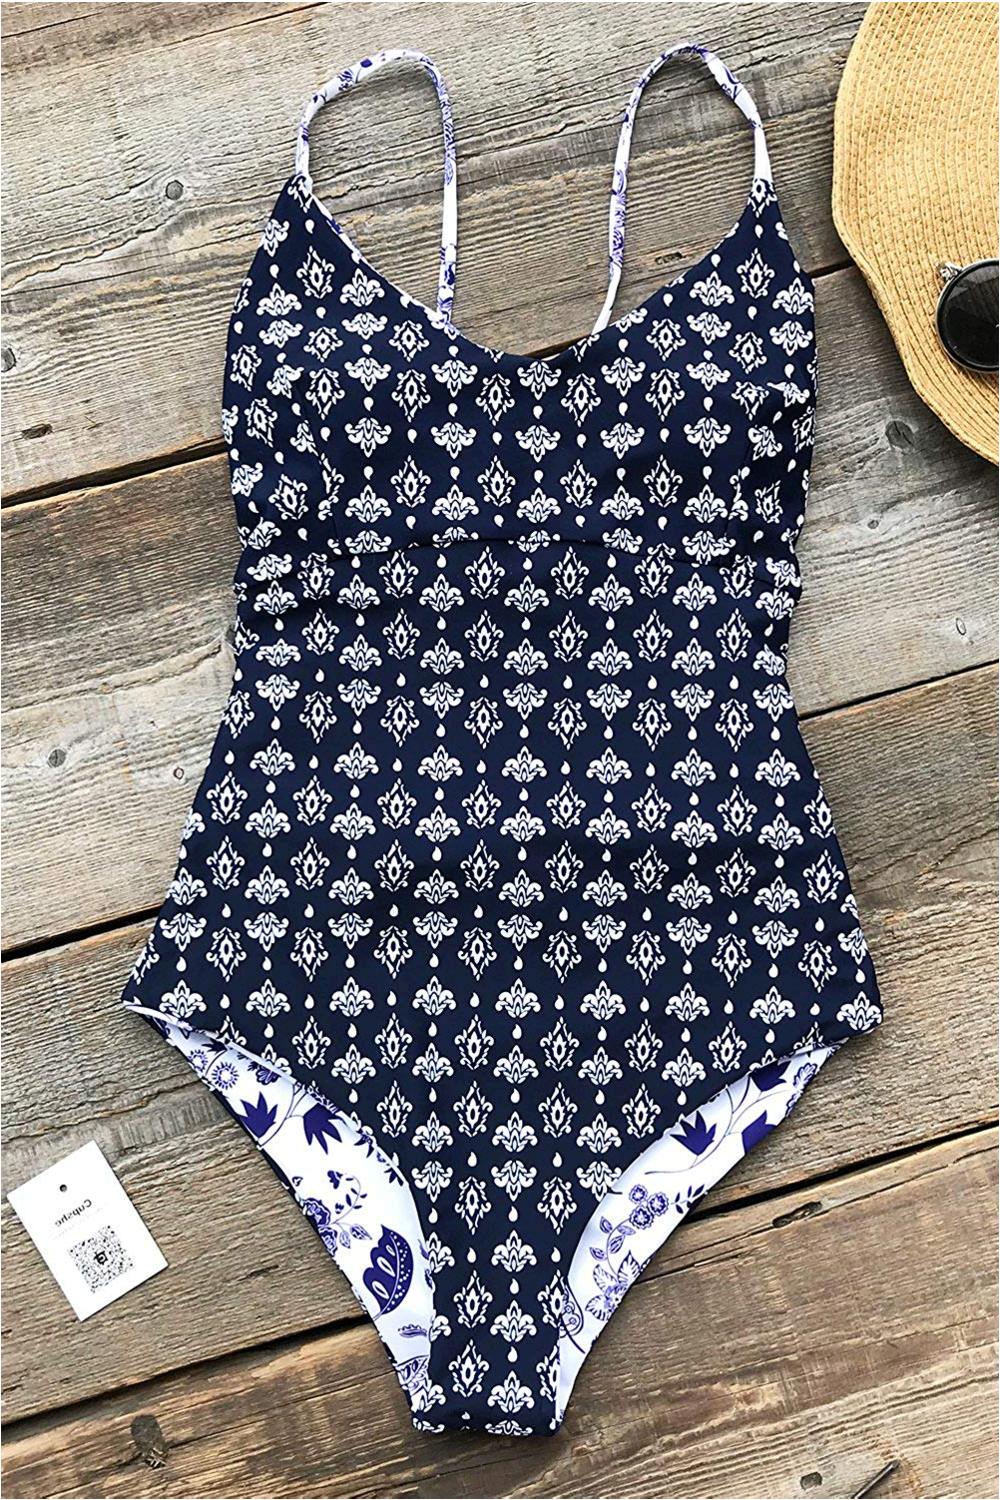 CUPSHE Light Up The Night Print One-Piece Swimsuit Beach, White, Size ...